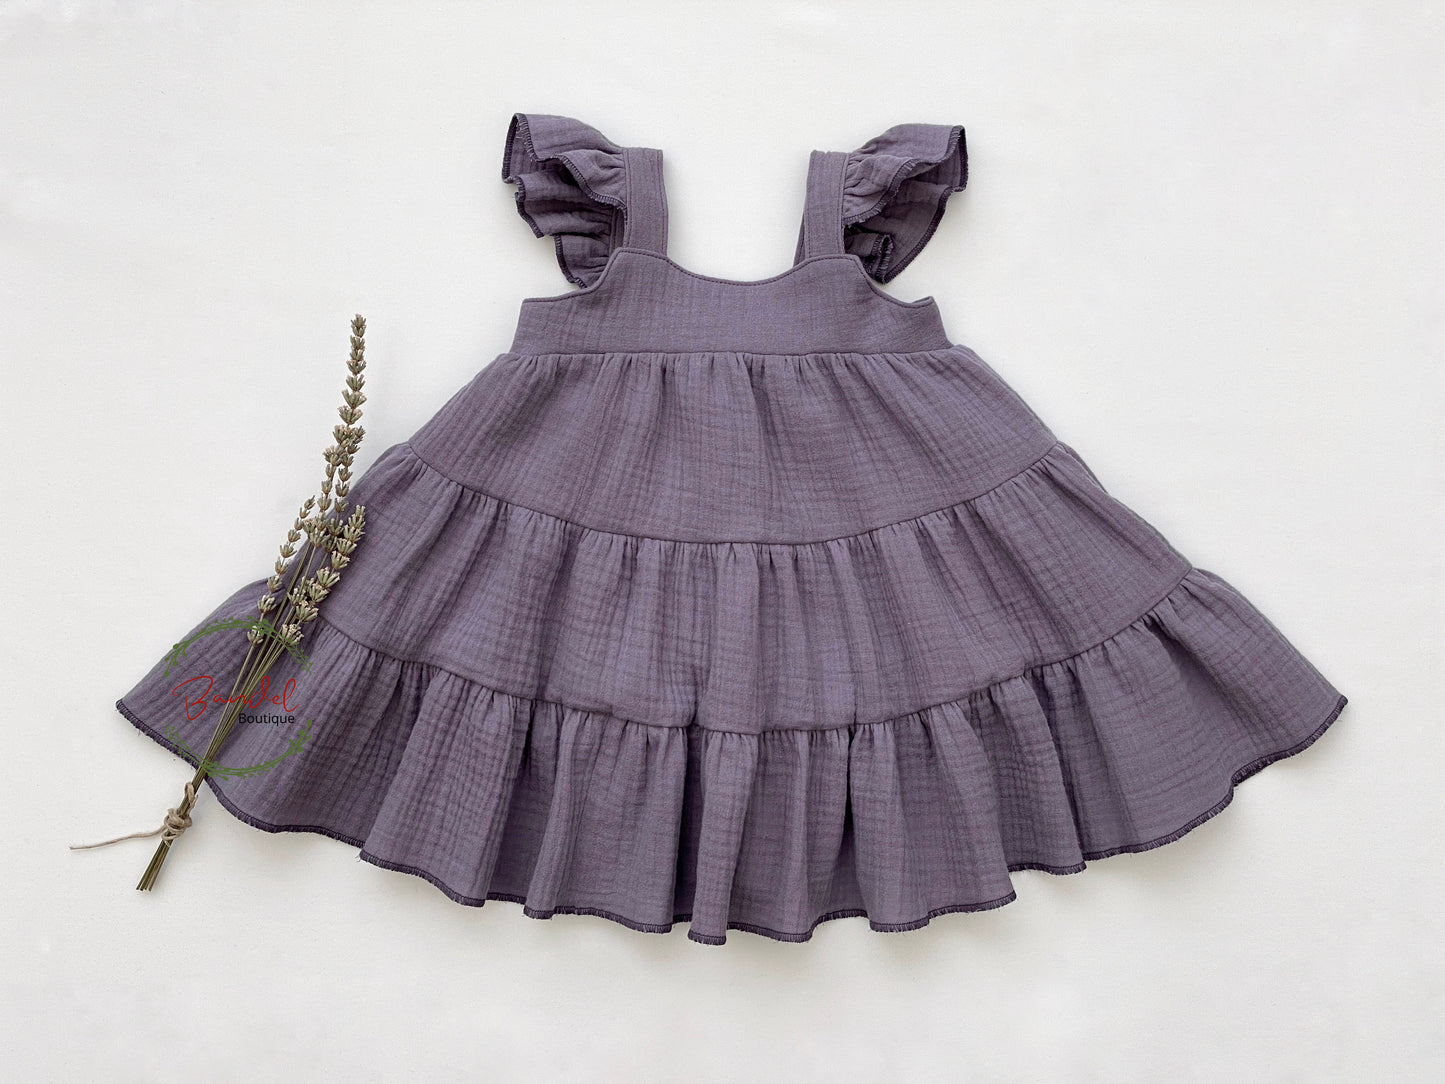 Lilac Flutter Sleeve Girl Dress is crafted from sustainable muslin fabric. It features a gathered tiered skirt, flutter sleeves, and an elastic back bodice for a perfect fit.